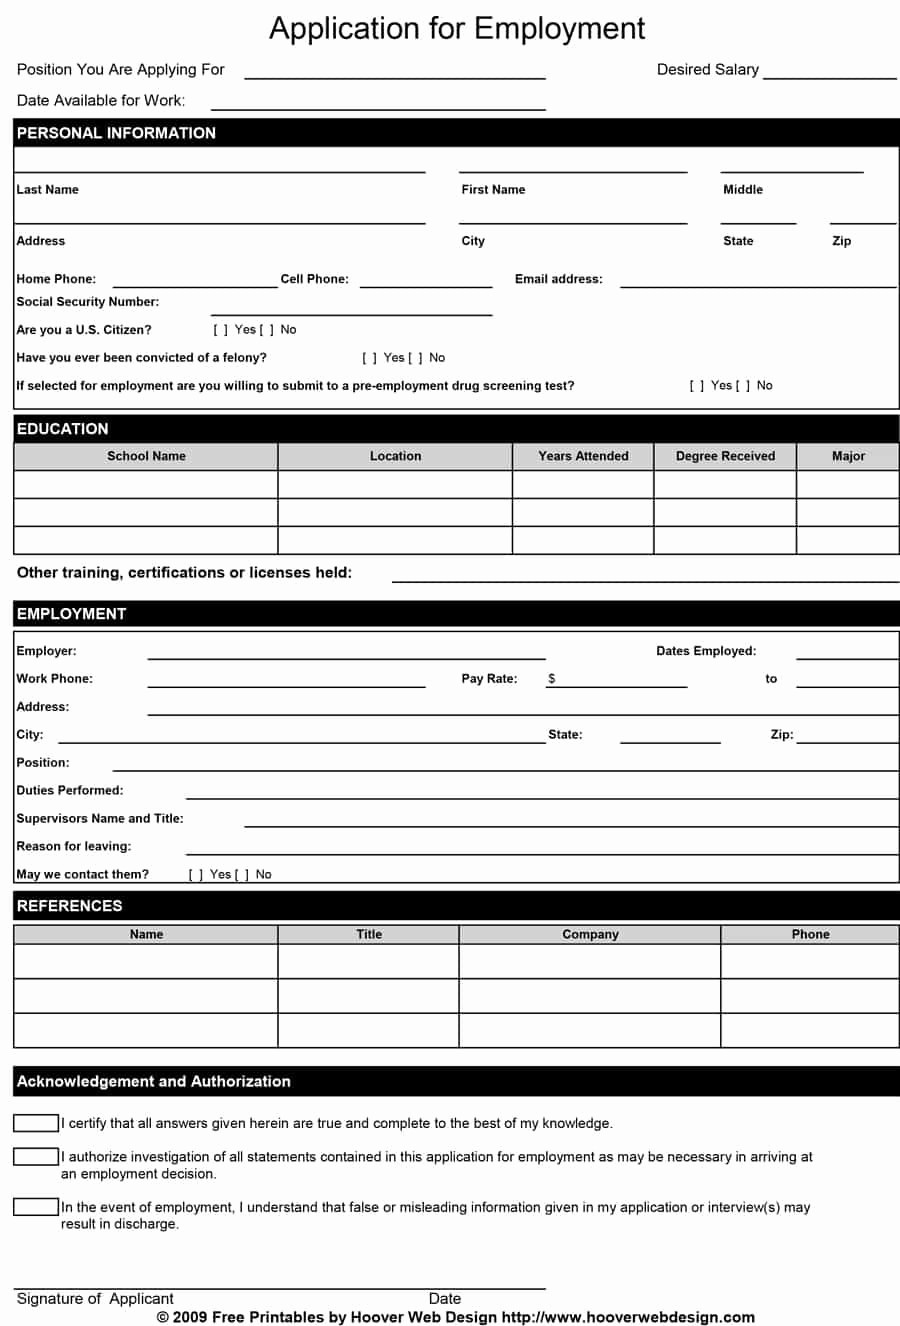 Application for Employment Free Template Inspirational Job Application Template Nothing is Going to Be Left Out